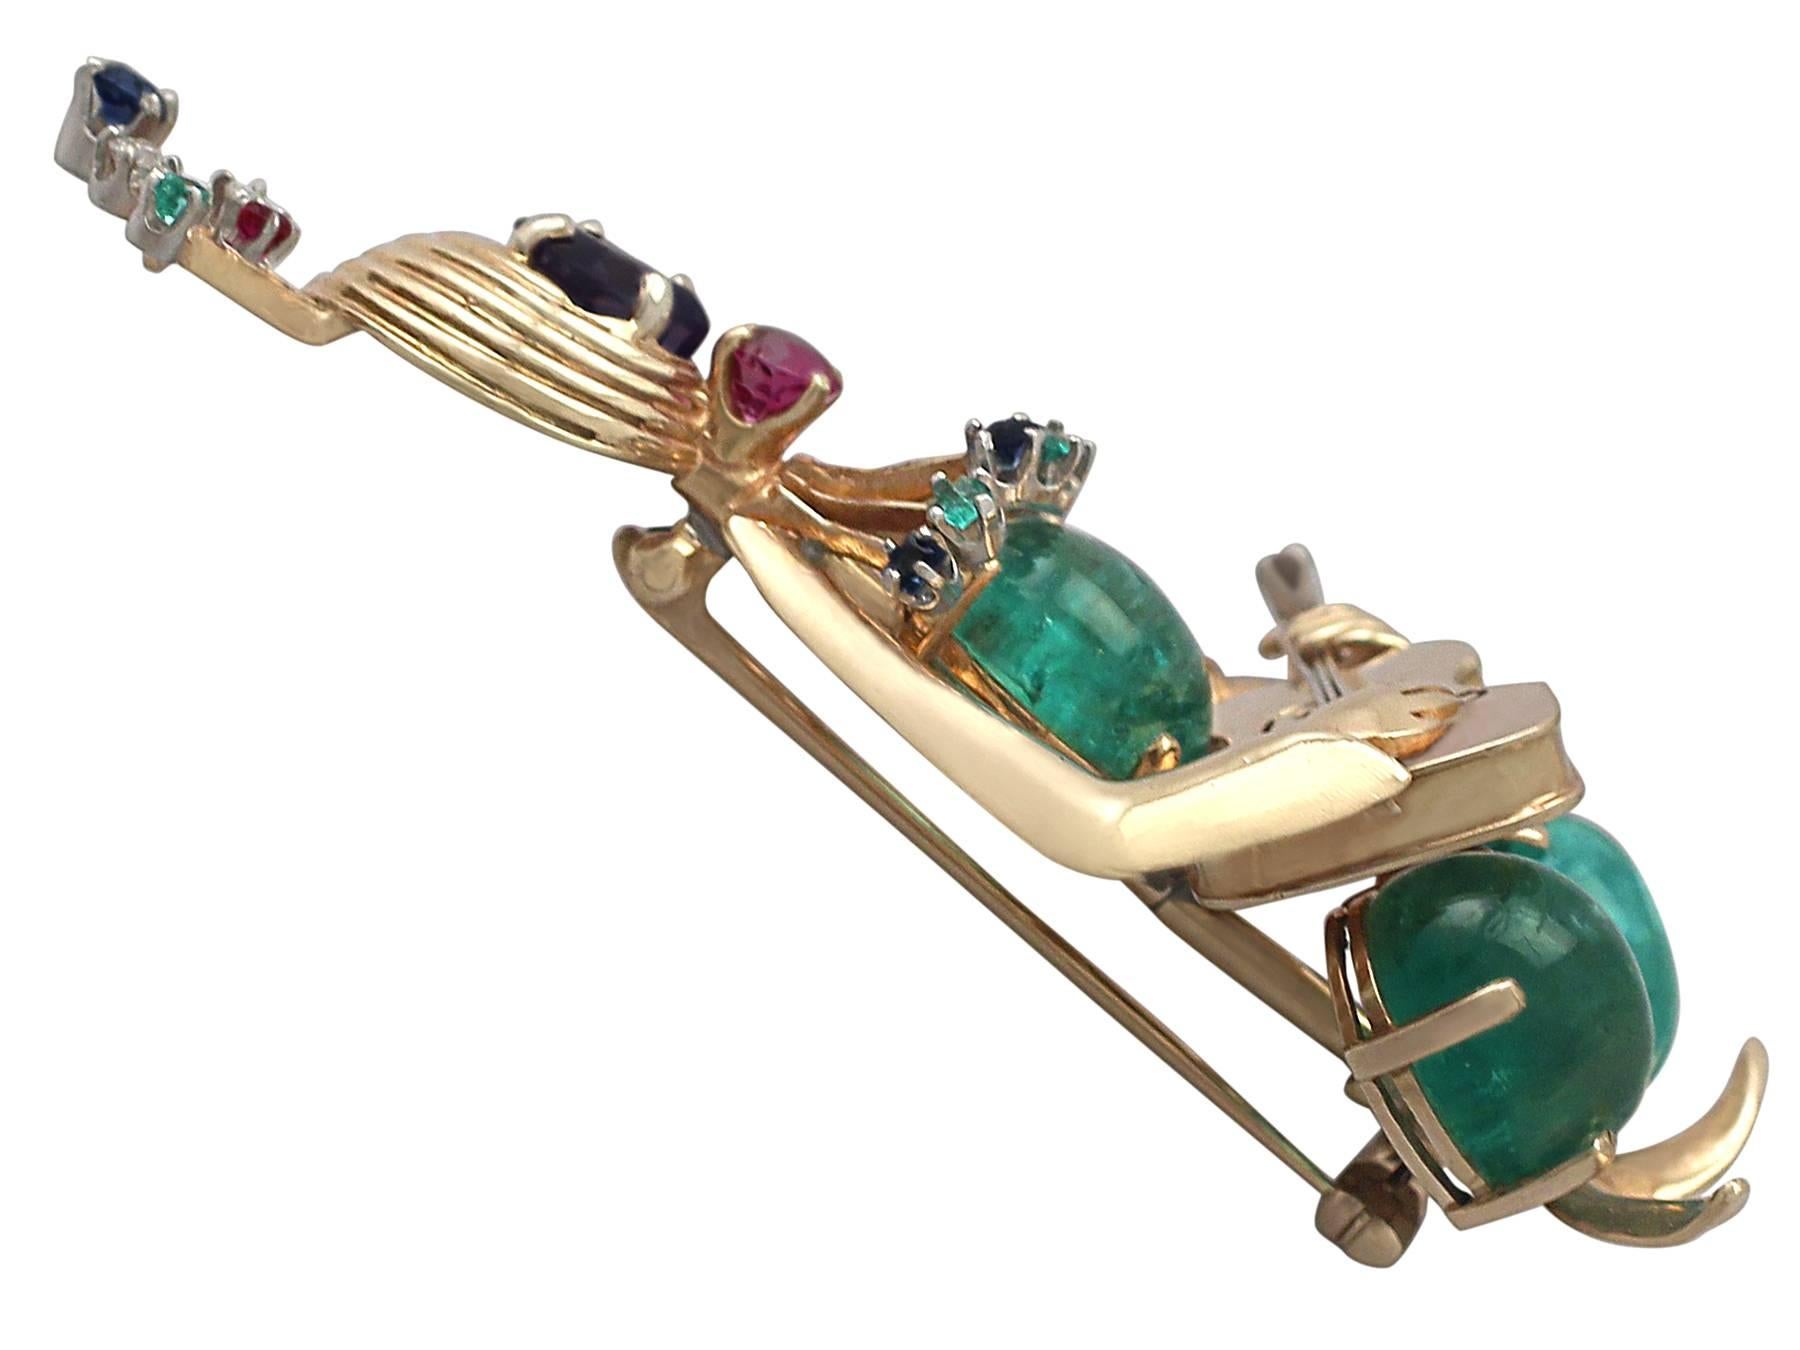 A stunning, fine and impressive 20.38 carat (total) precious gemstone and diamond, tutti frutti style, 14 karat yellow gold brooch; part of our vintage jewelry and estate jewelry collections

This stunning vintage multi-gemstone brooch has been